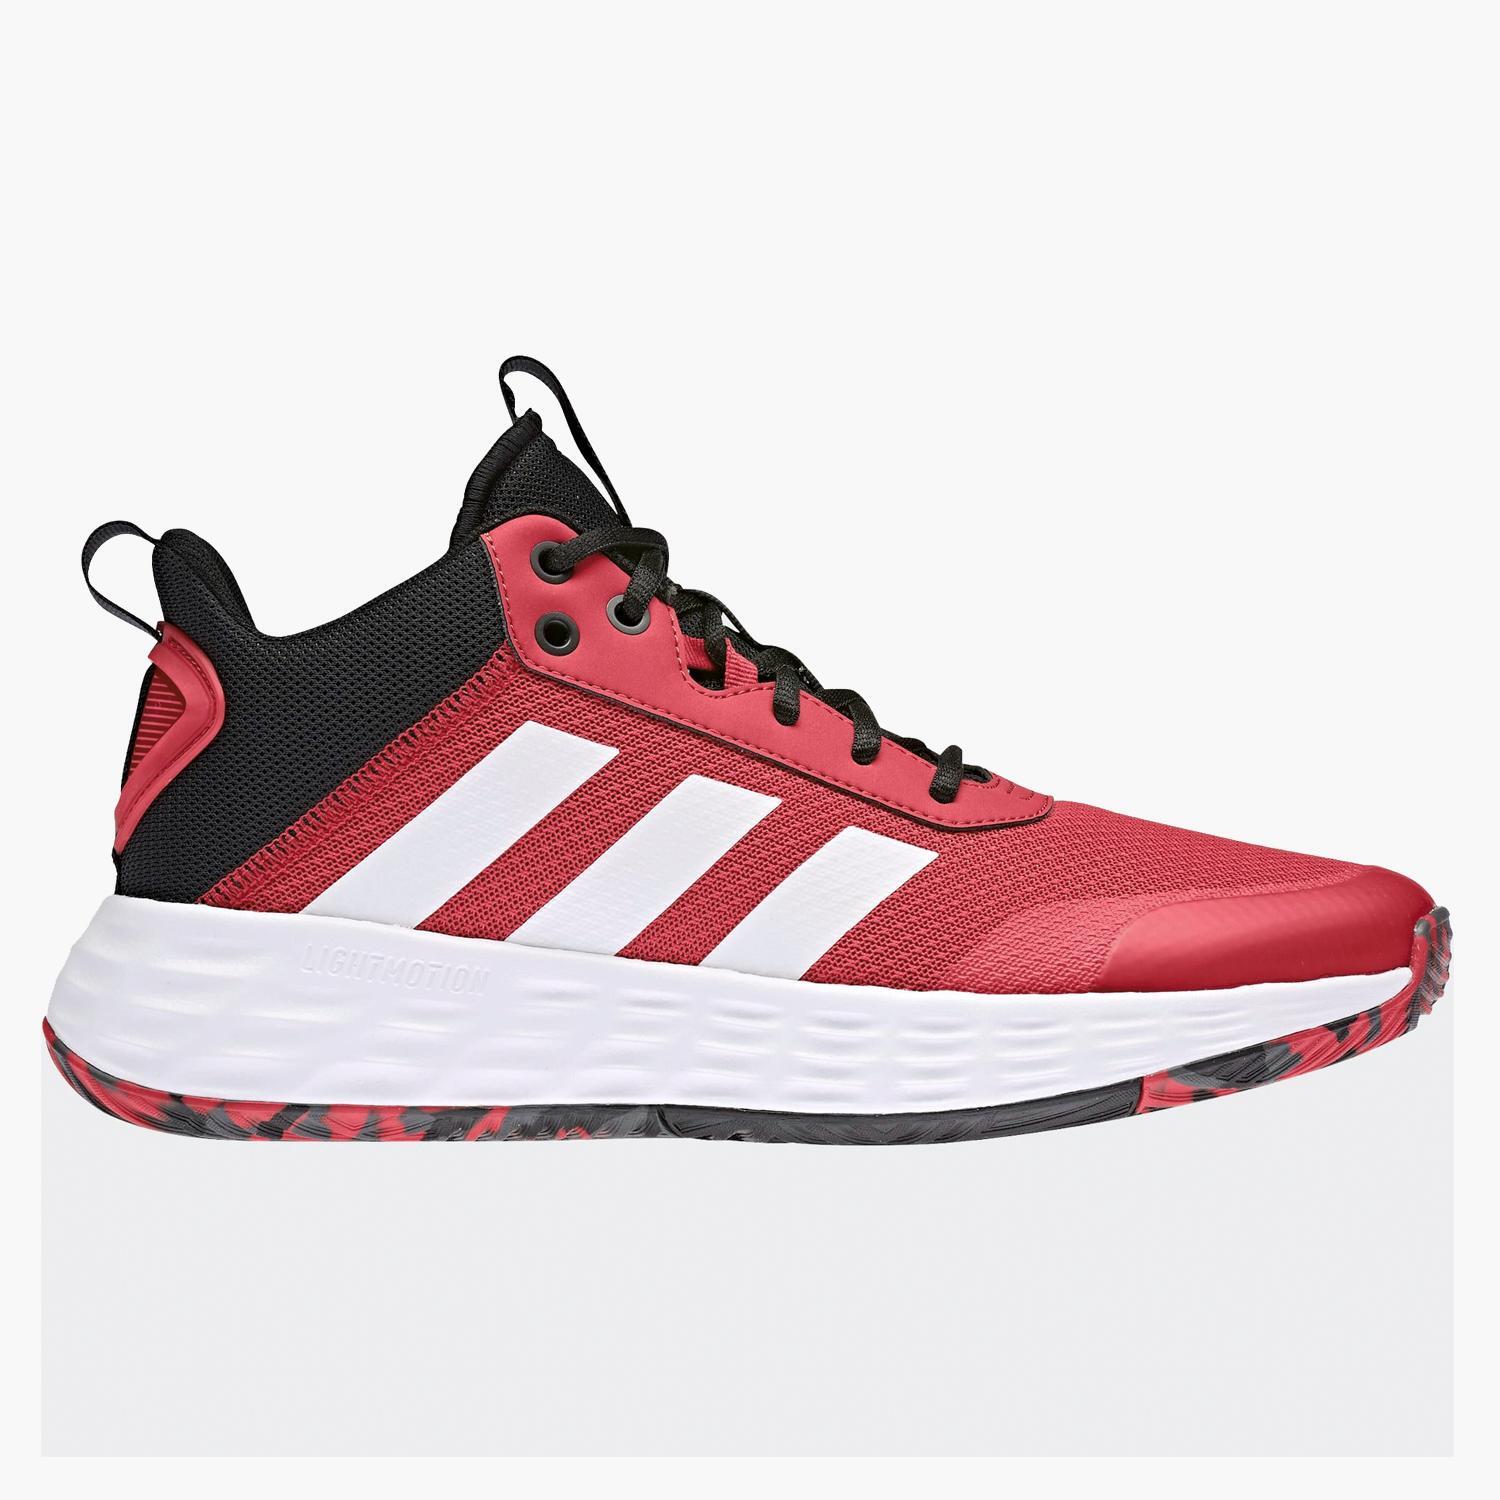 adidas Ownthegame 2.0 - Rouge - Chaussures Basket Homme sports taille 43.5